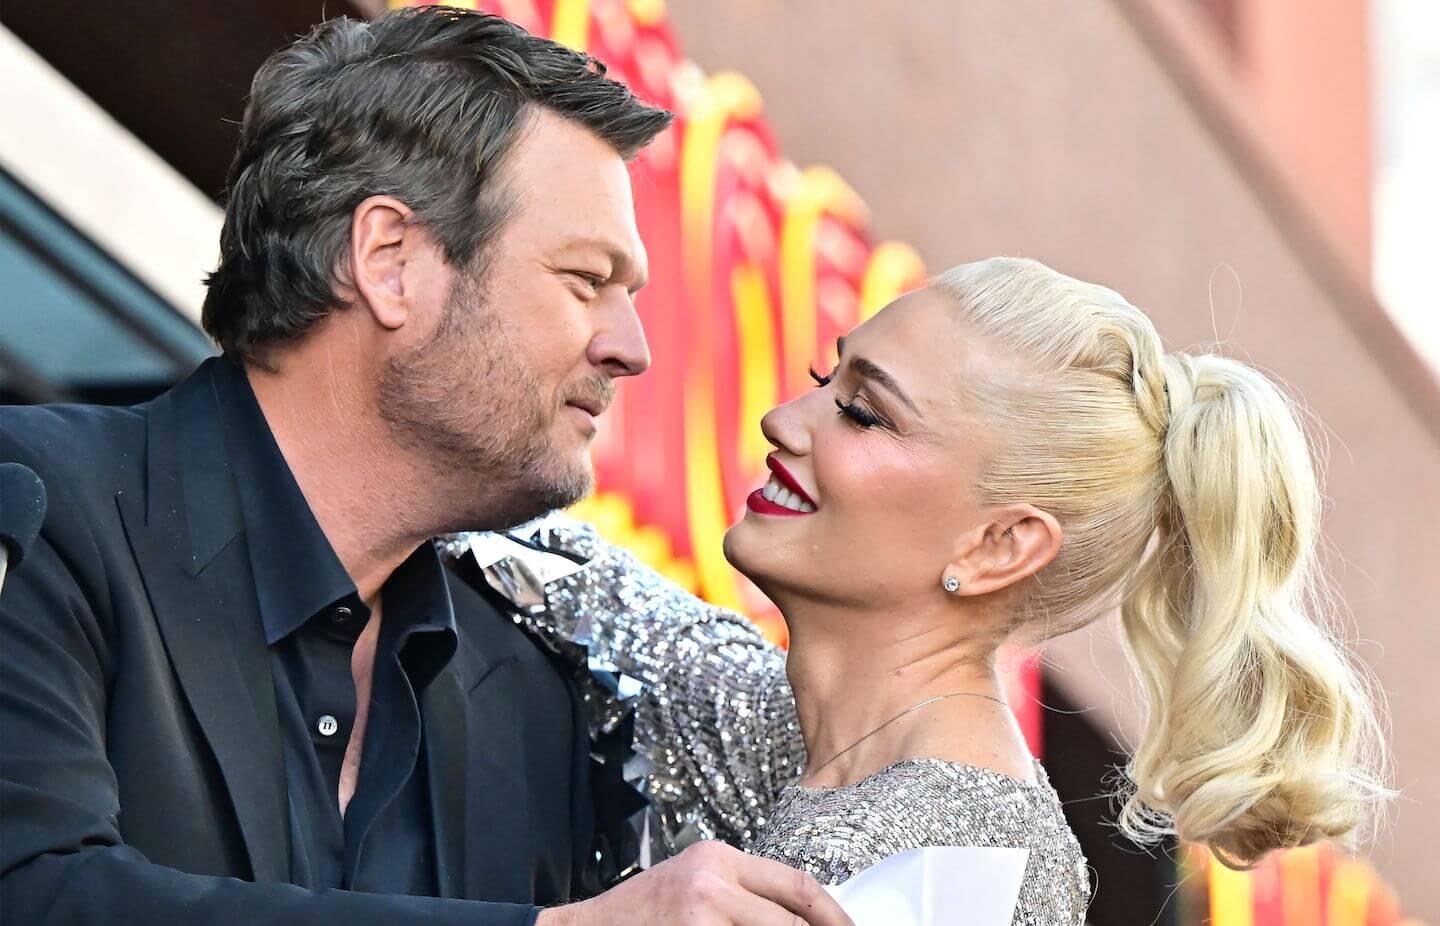 'The Voice' stars Blake Shelton and Gwen Stefani looking into each other's eyes